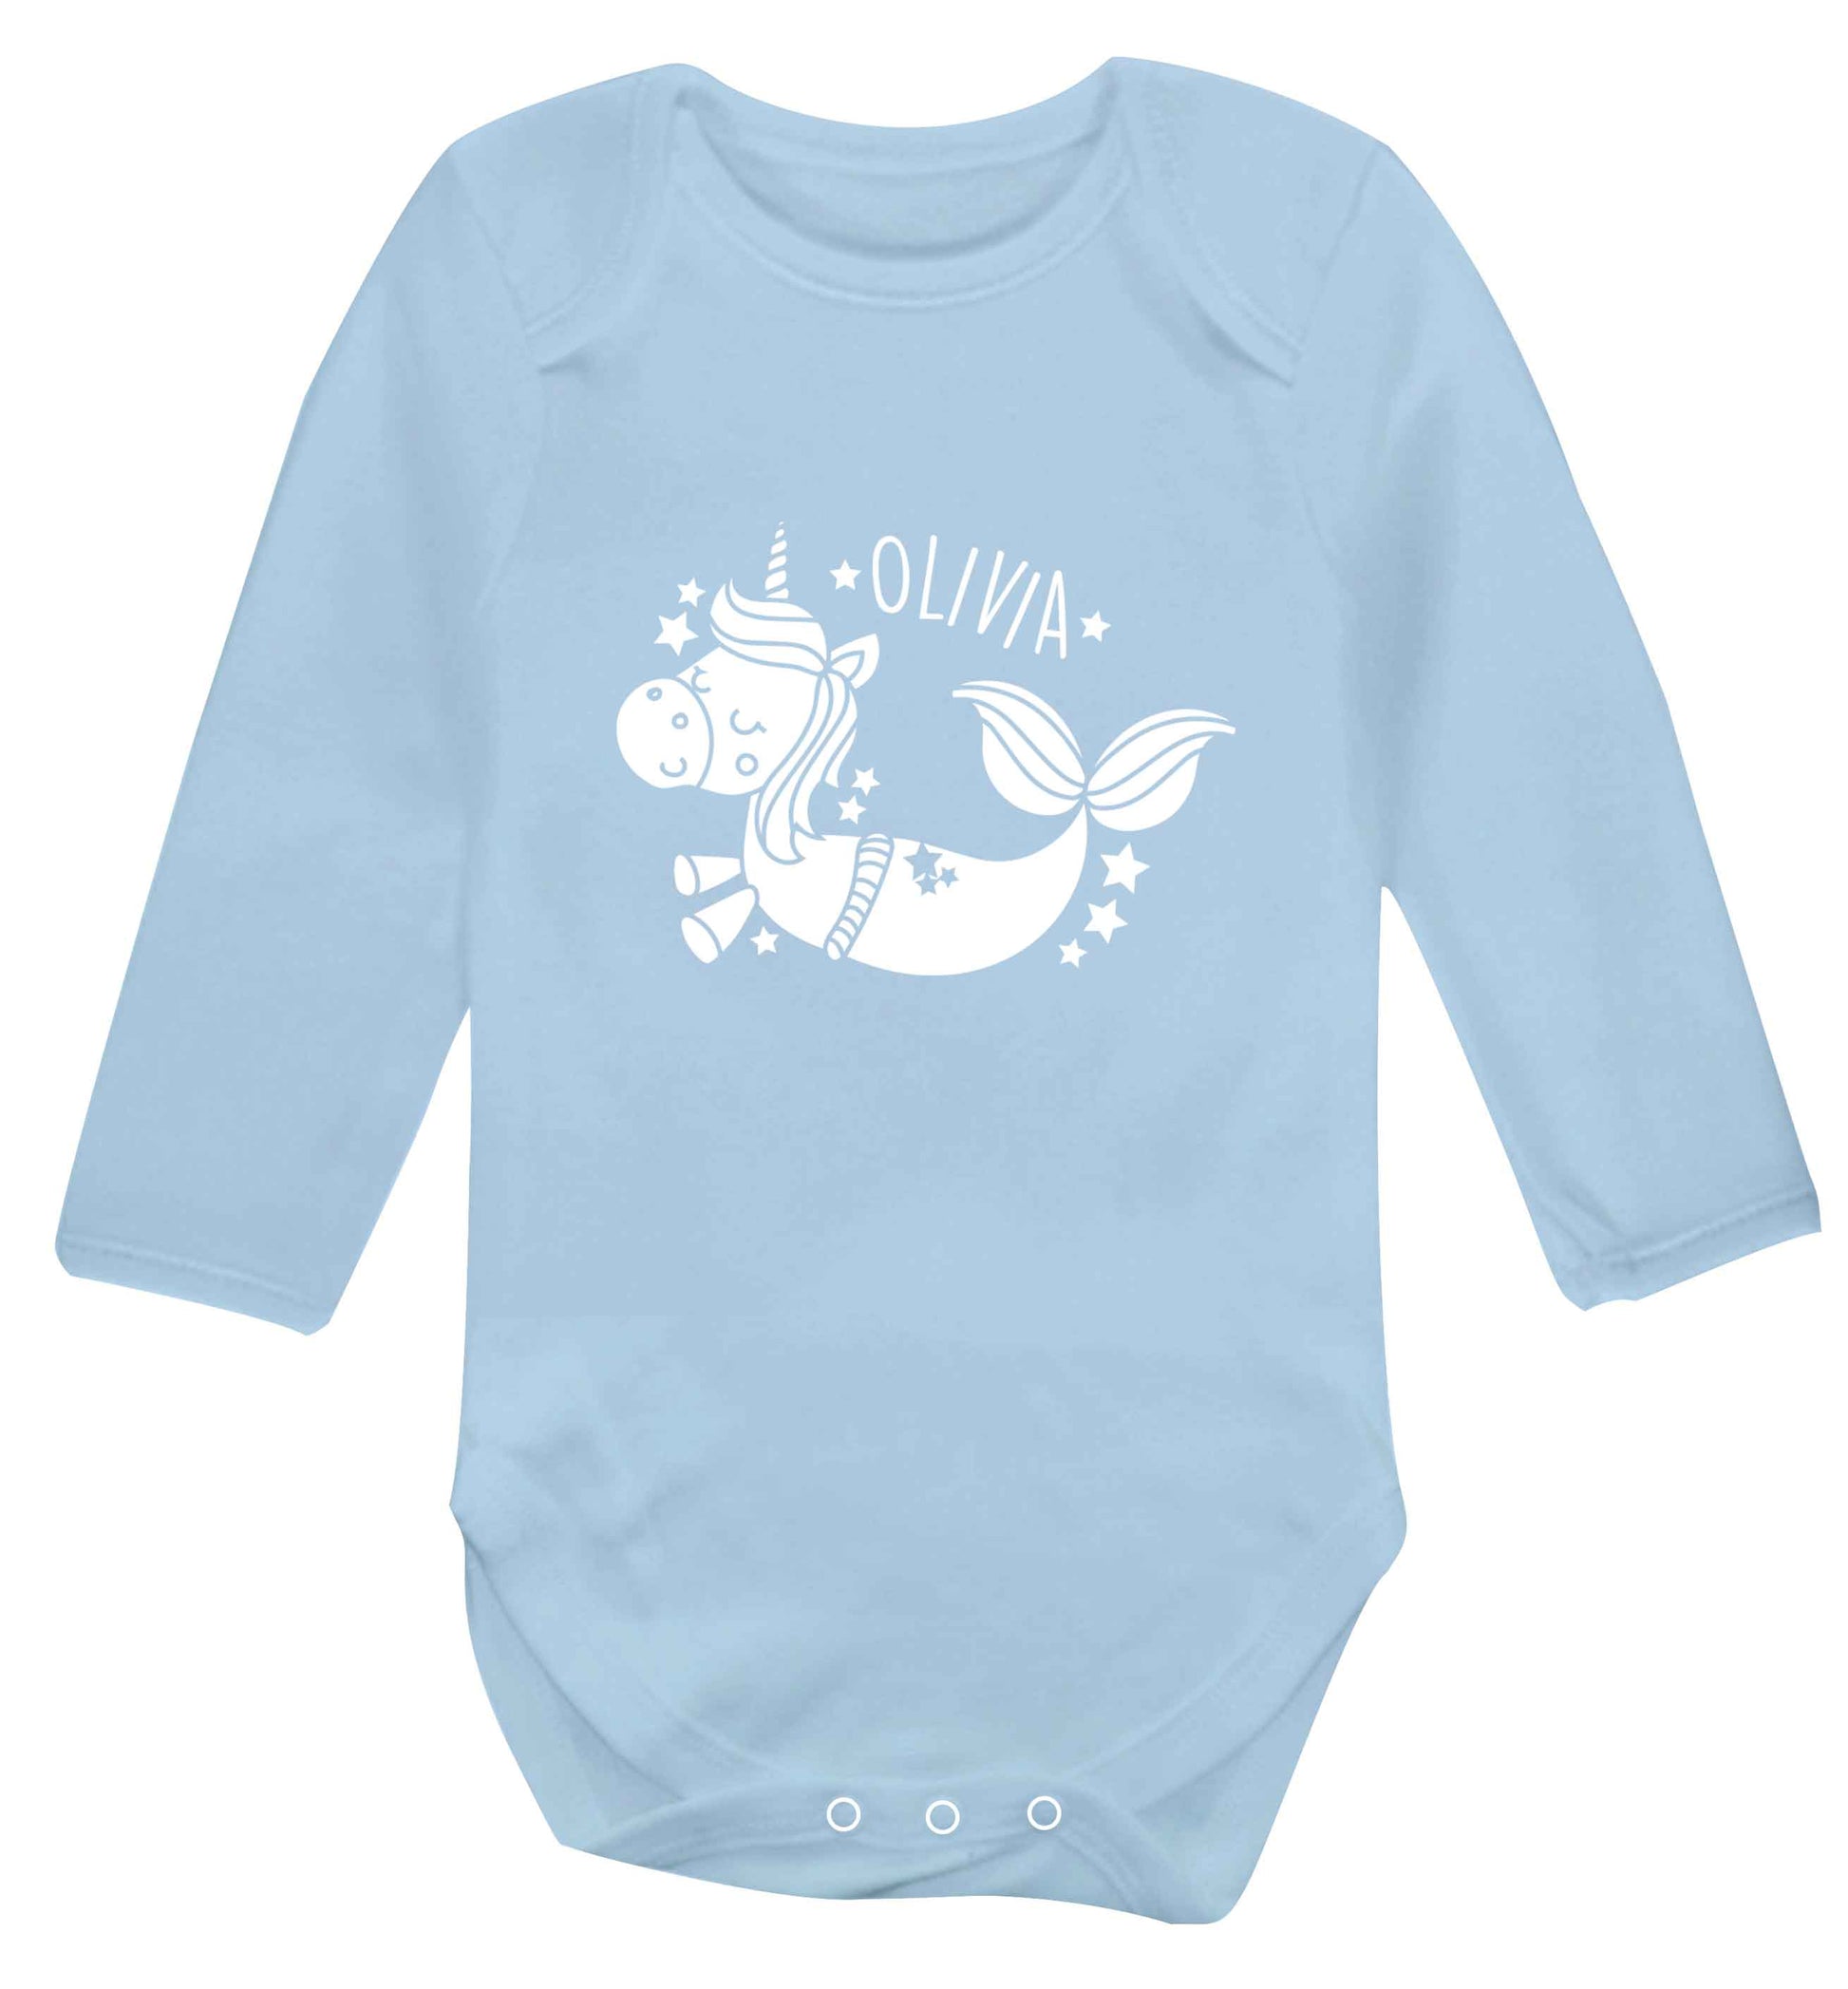 Unicorn mermaid - any name baby vest long sleeved pale blue 6-12 months